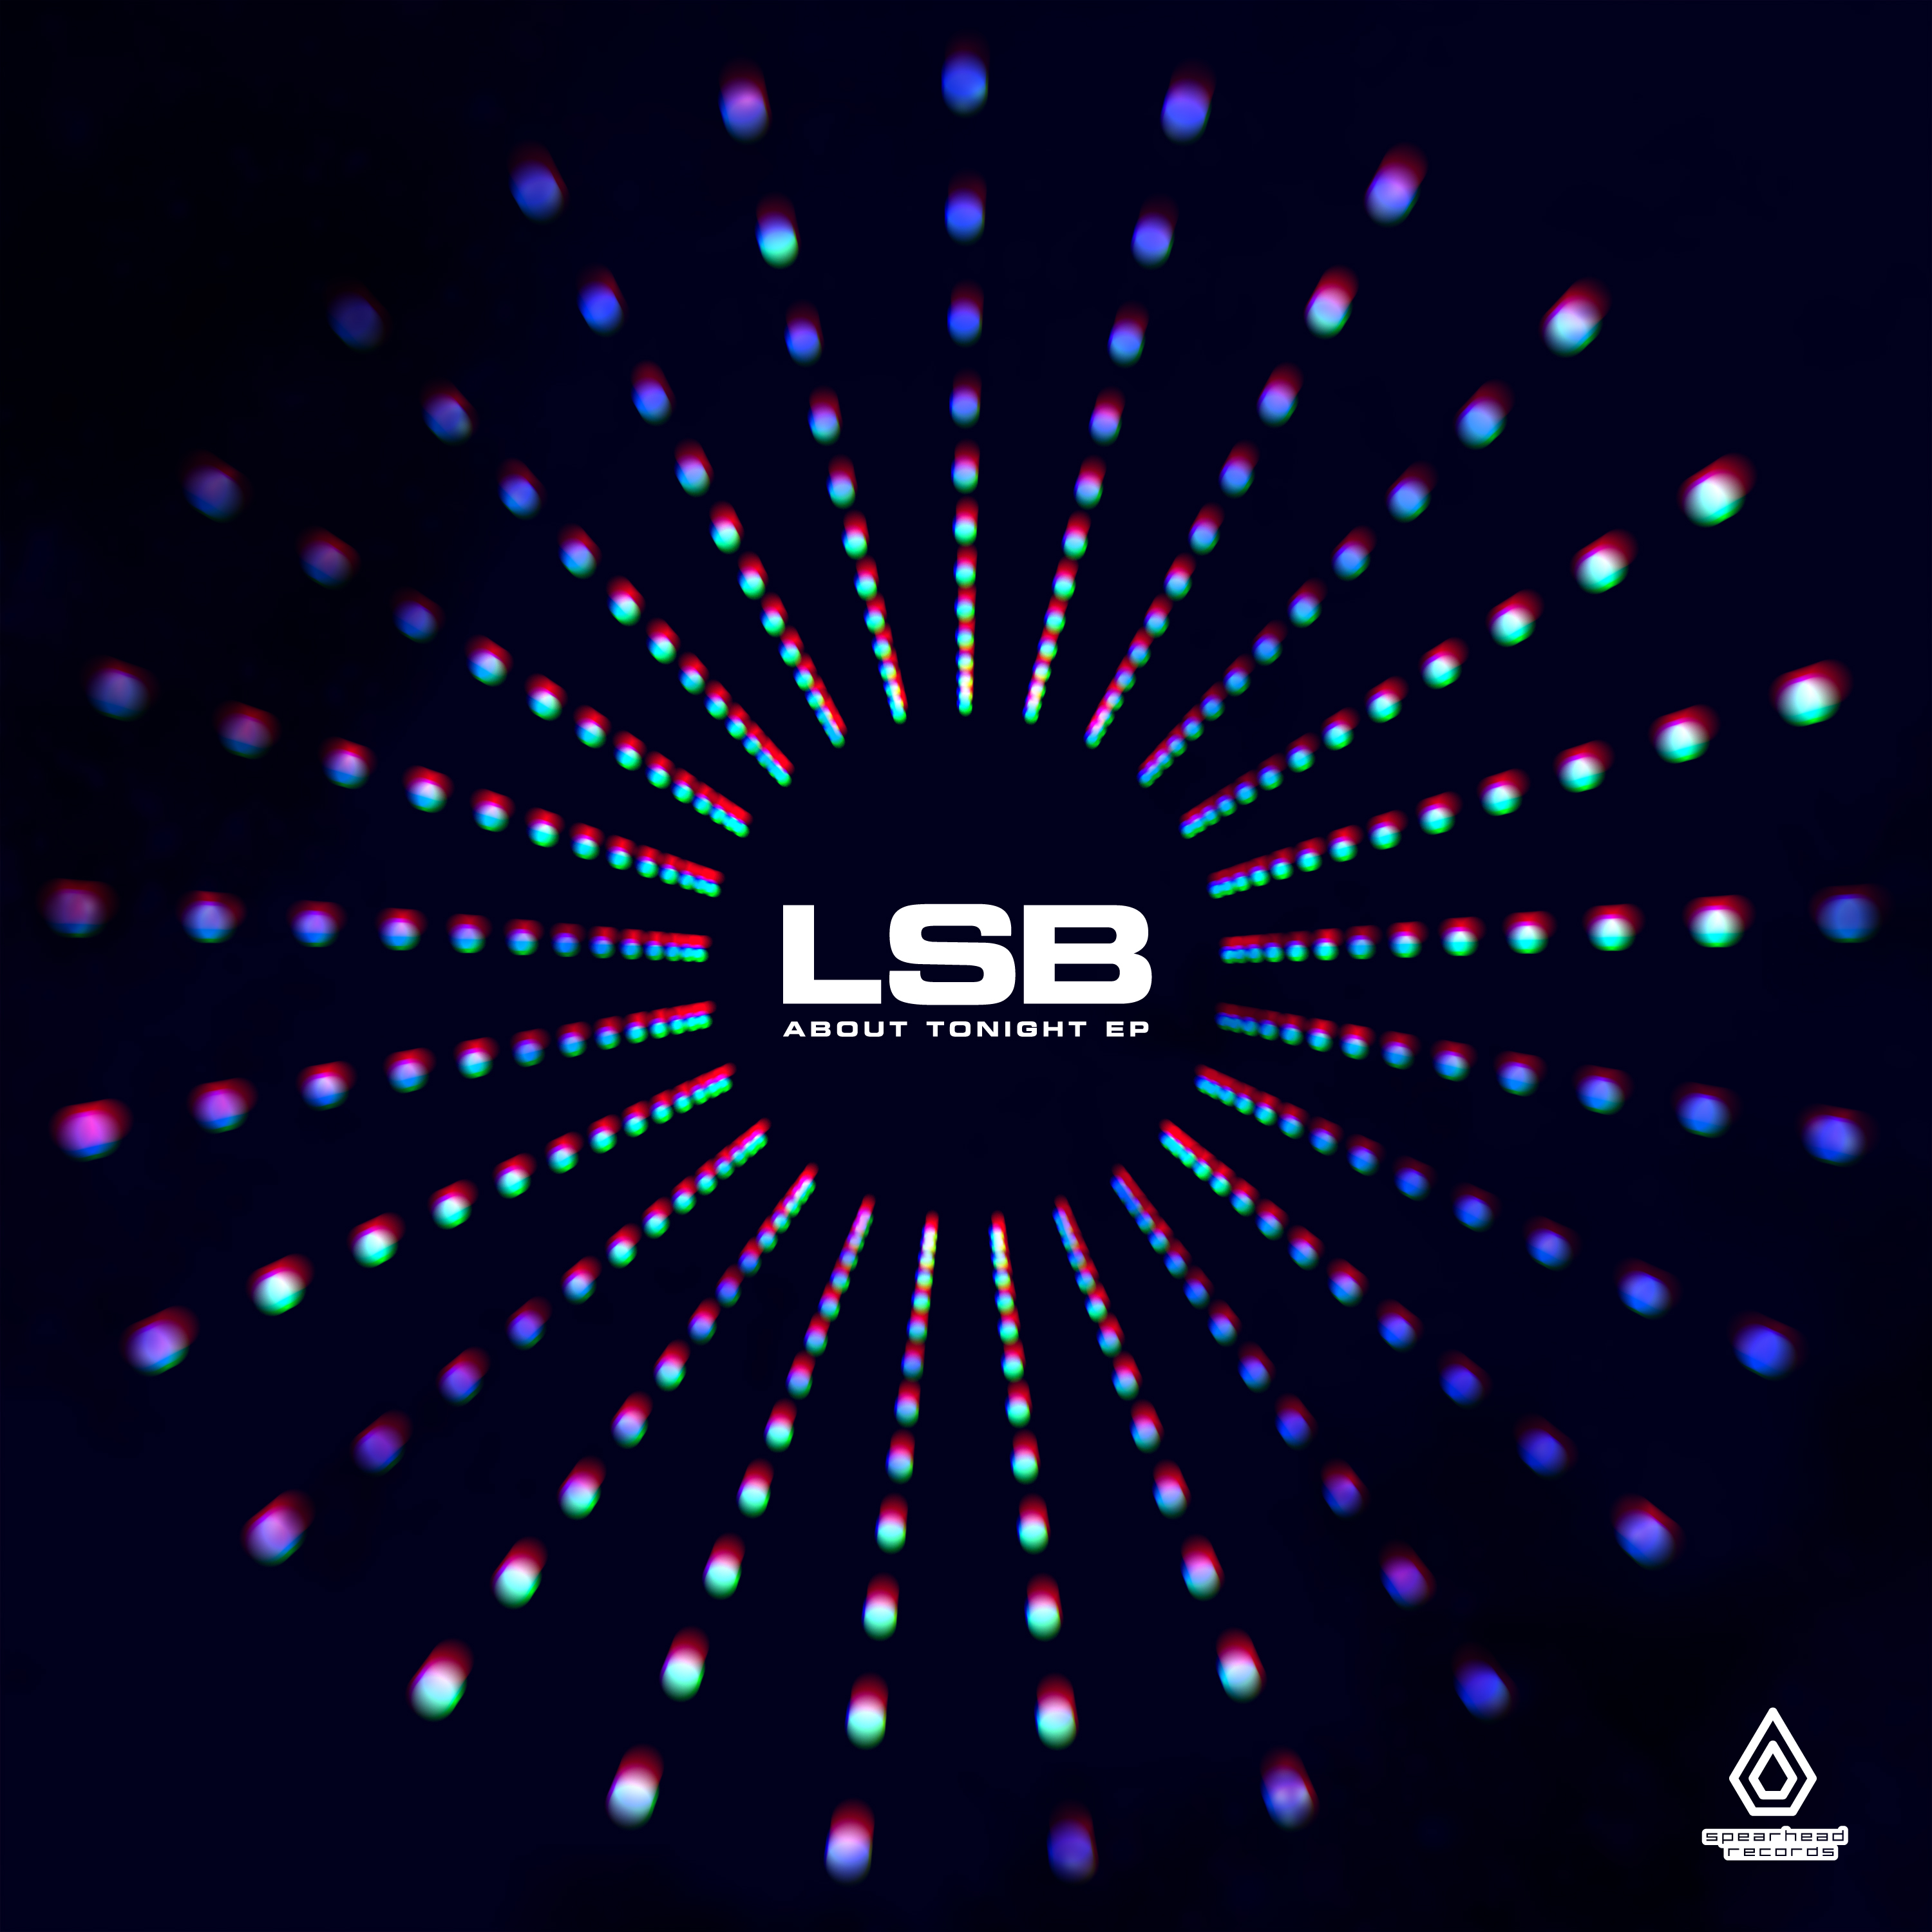 LSB/ABOUT TONIGHT EP (PIC DISC) 12"